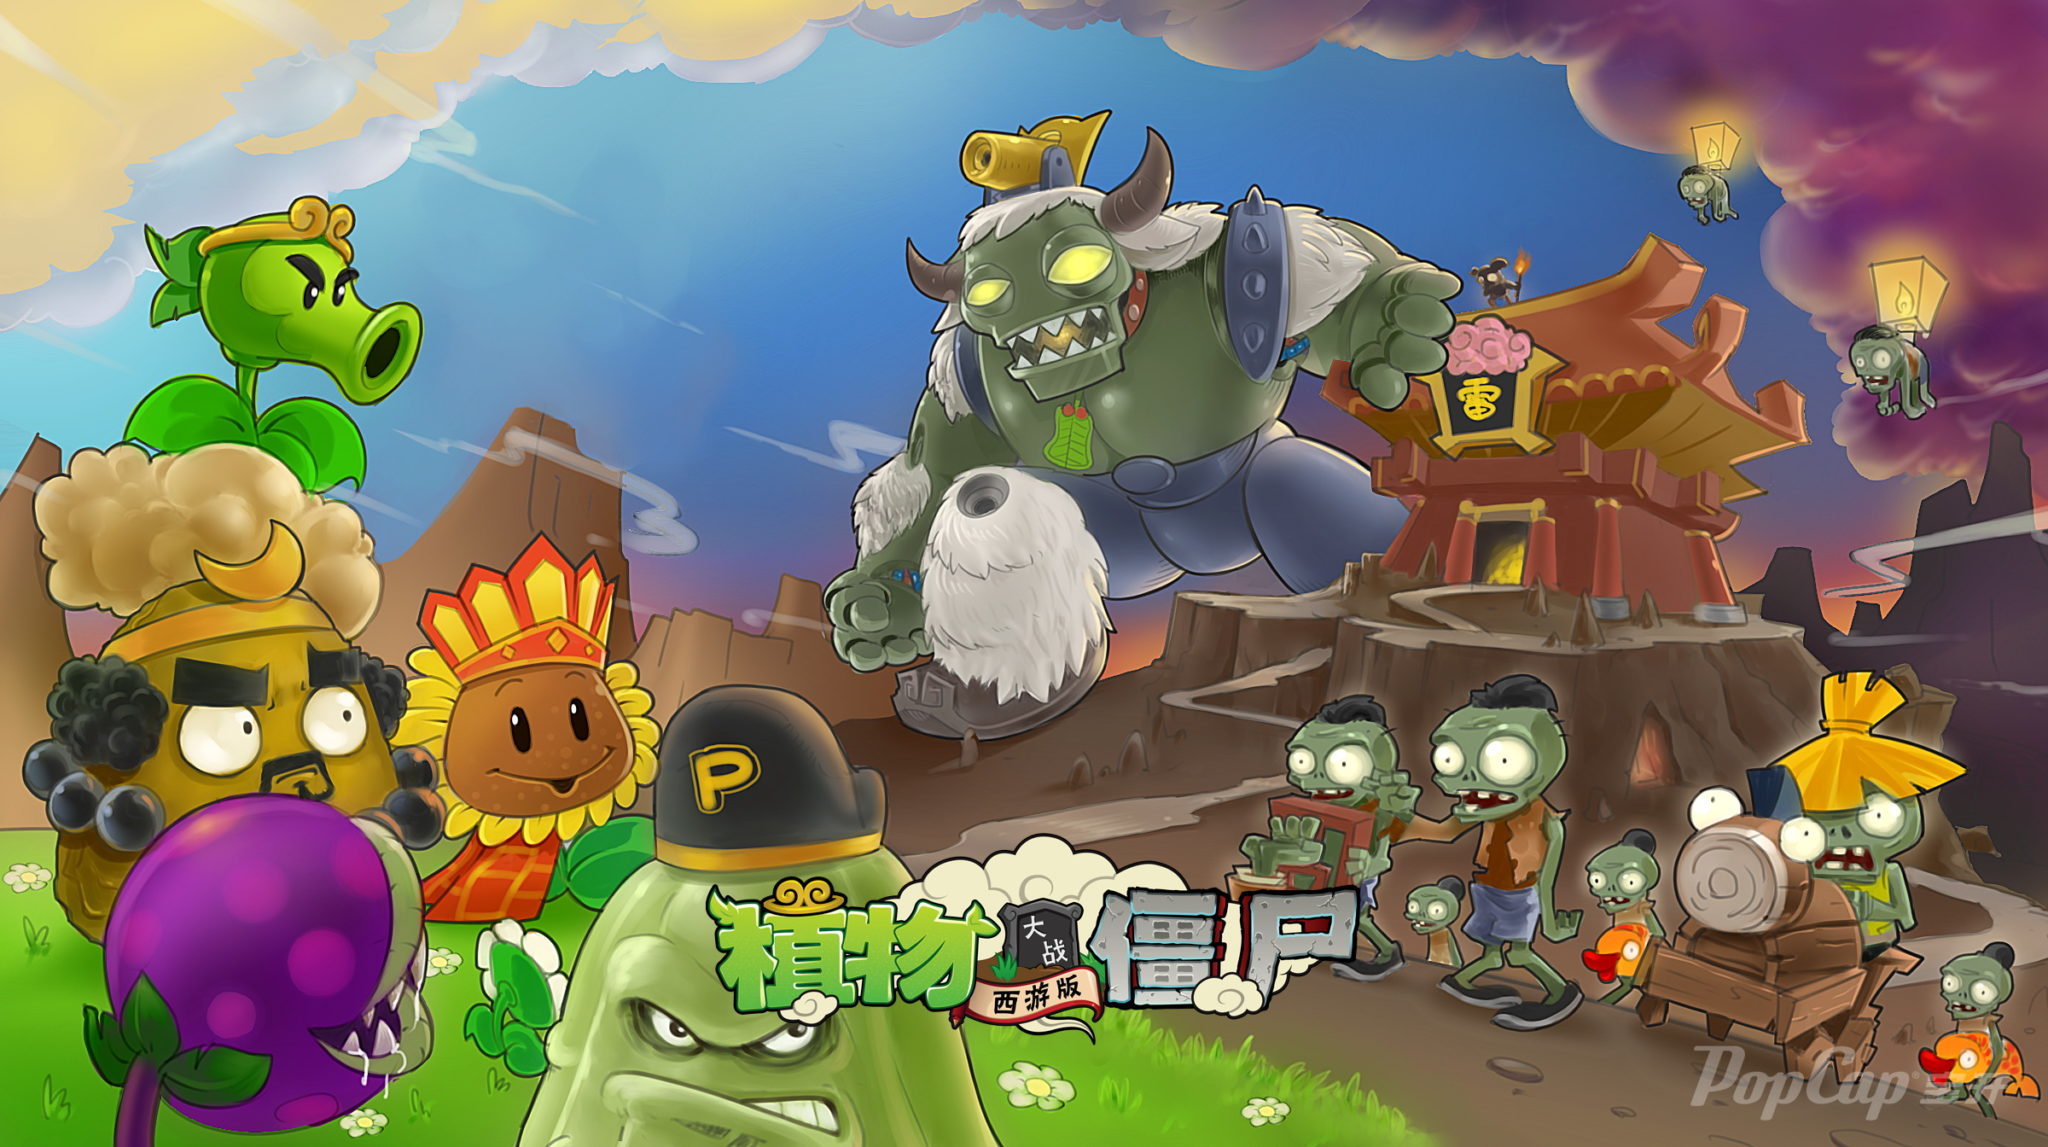 China's Version of Plants vs. Zombies